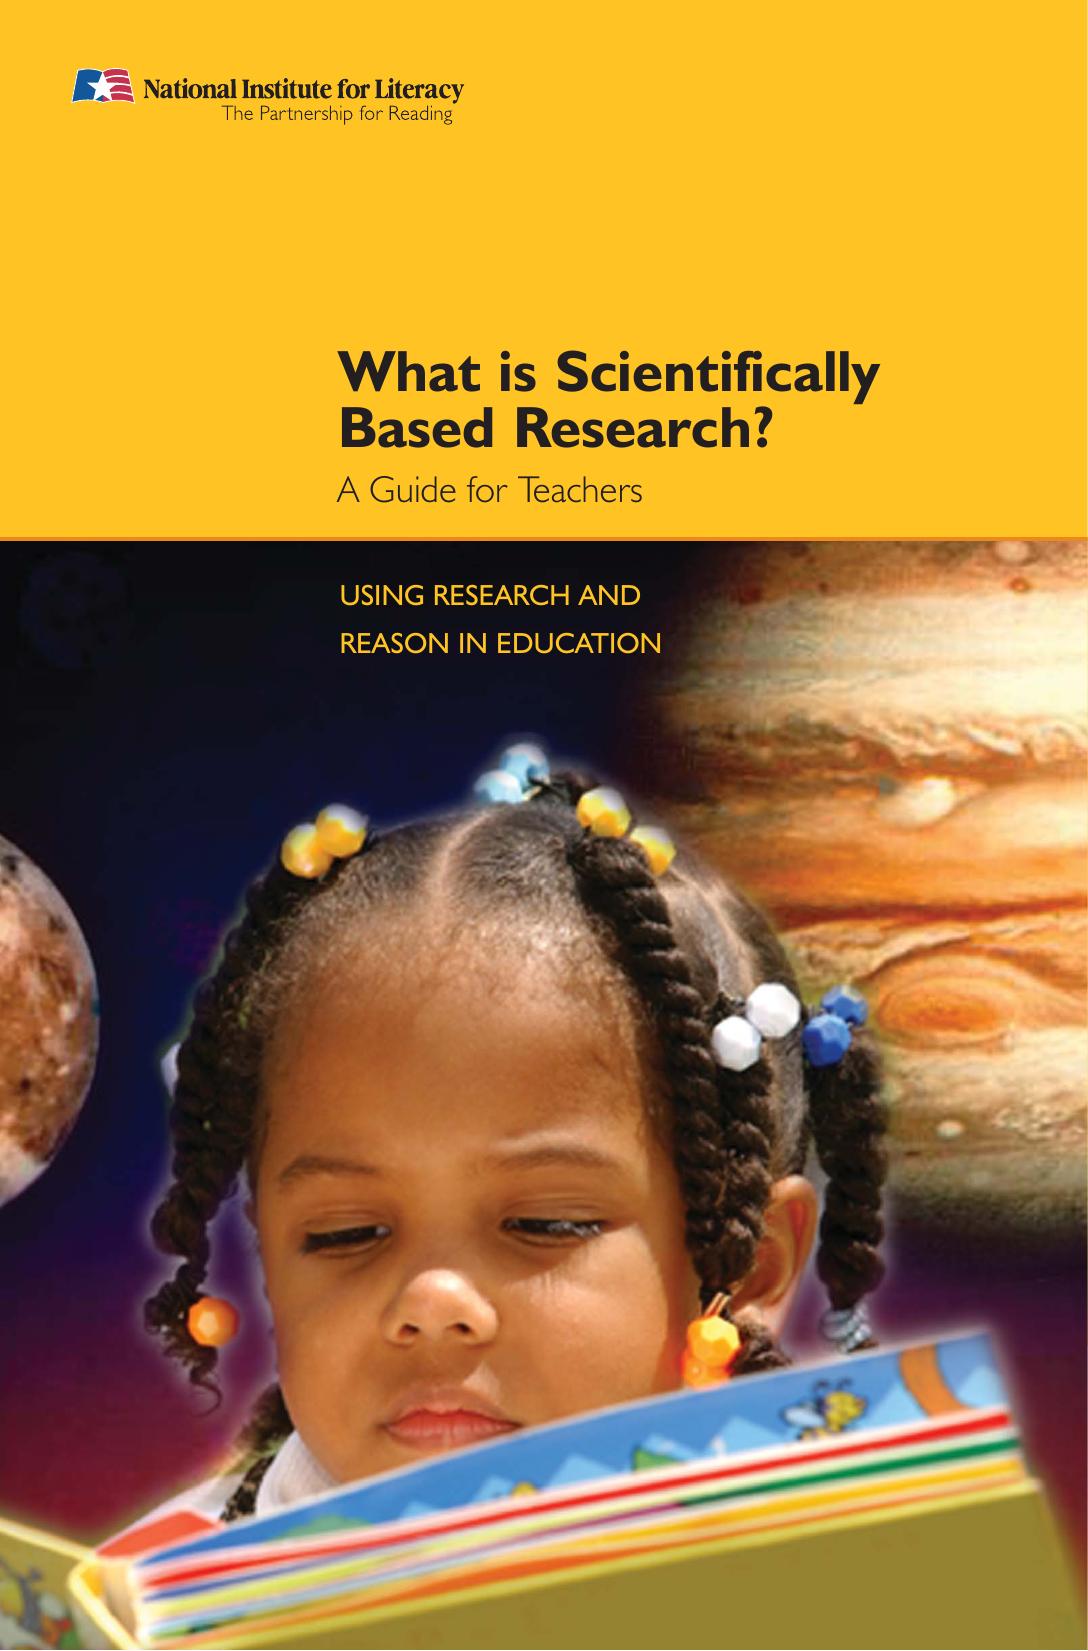 What Is Scientifically Based Research?